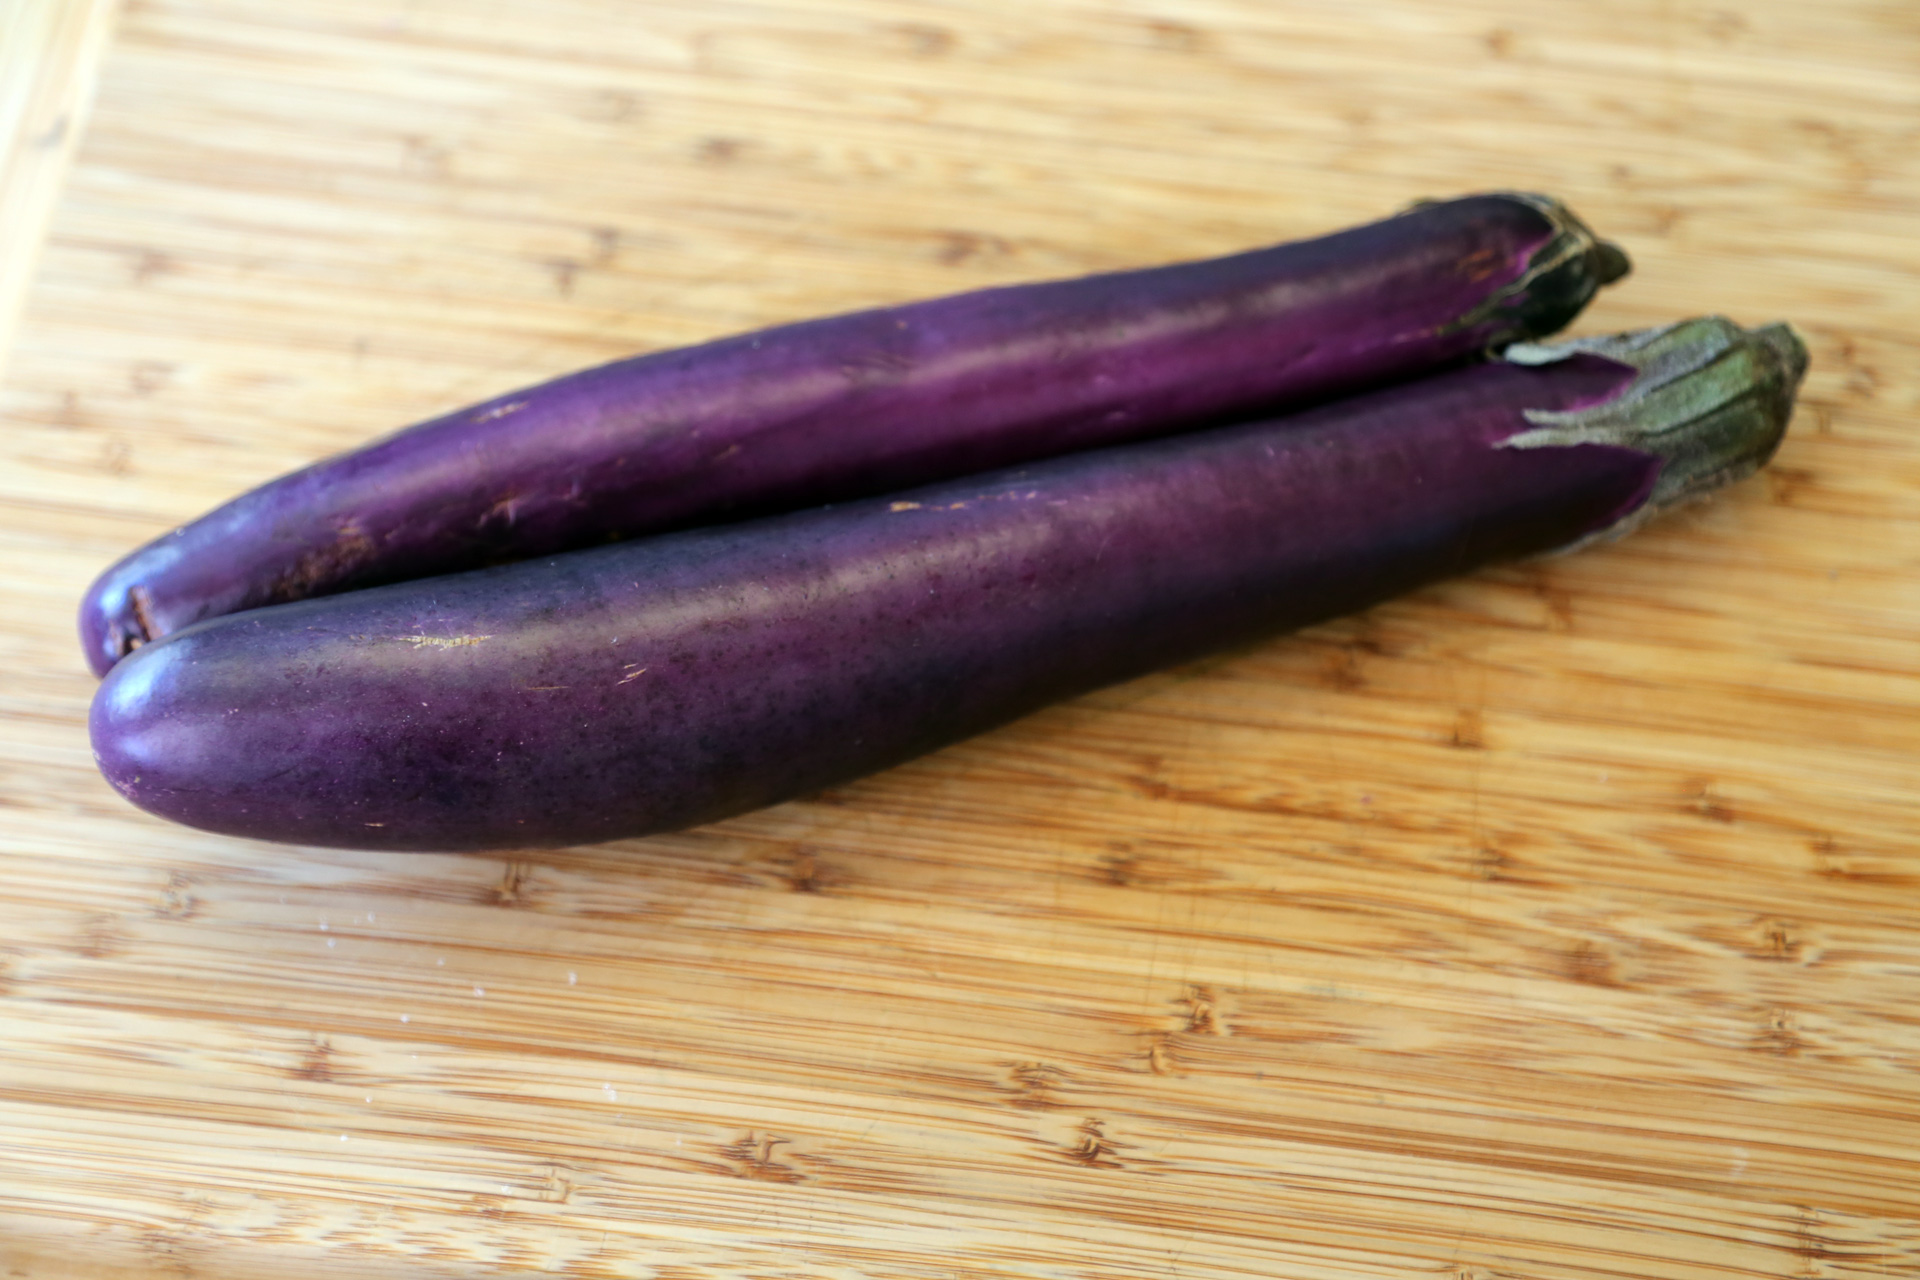 I love the sweetness of narrow Japanese eggplants, and chose those to slice into planks and grill. 